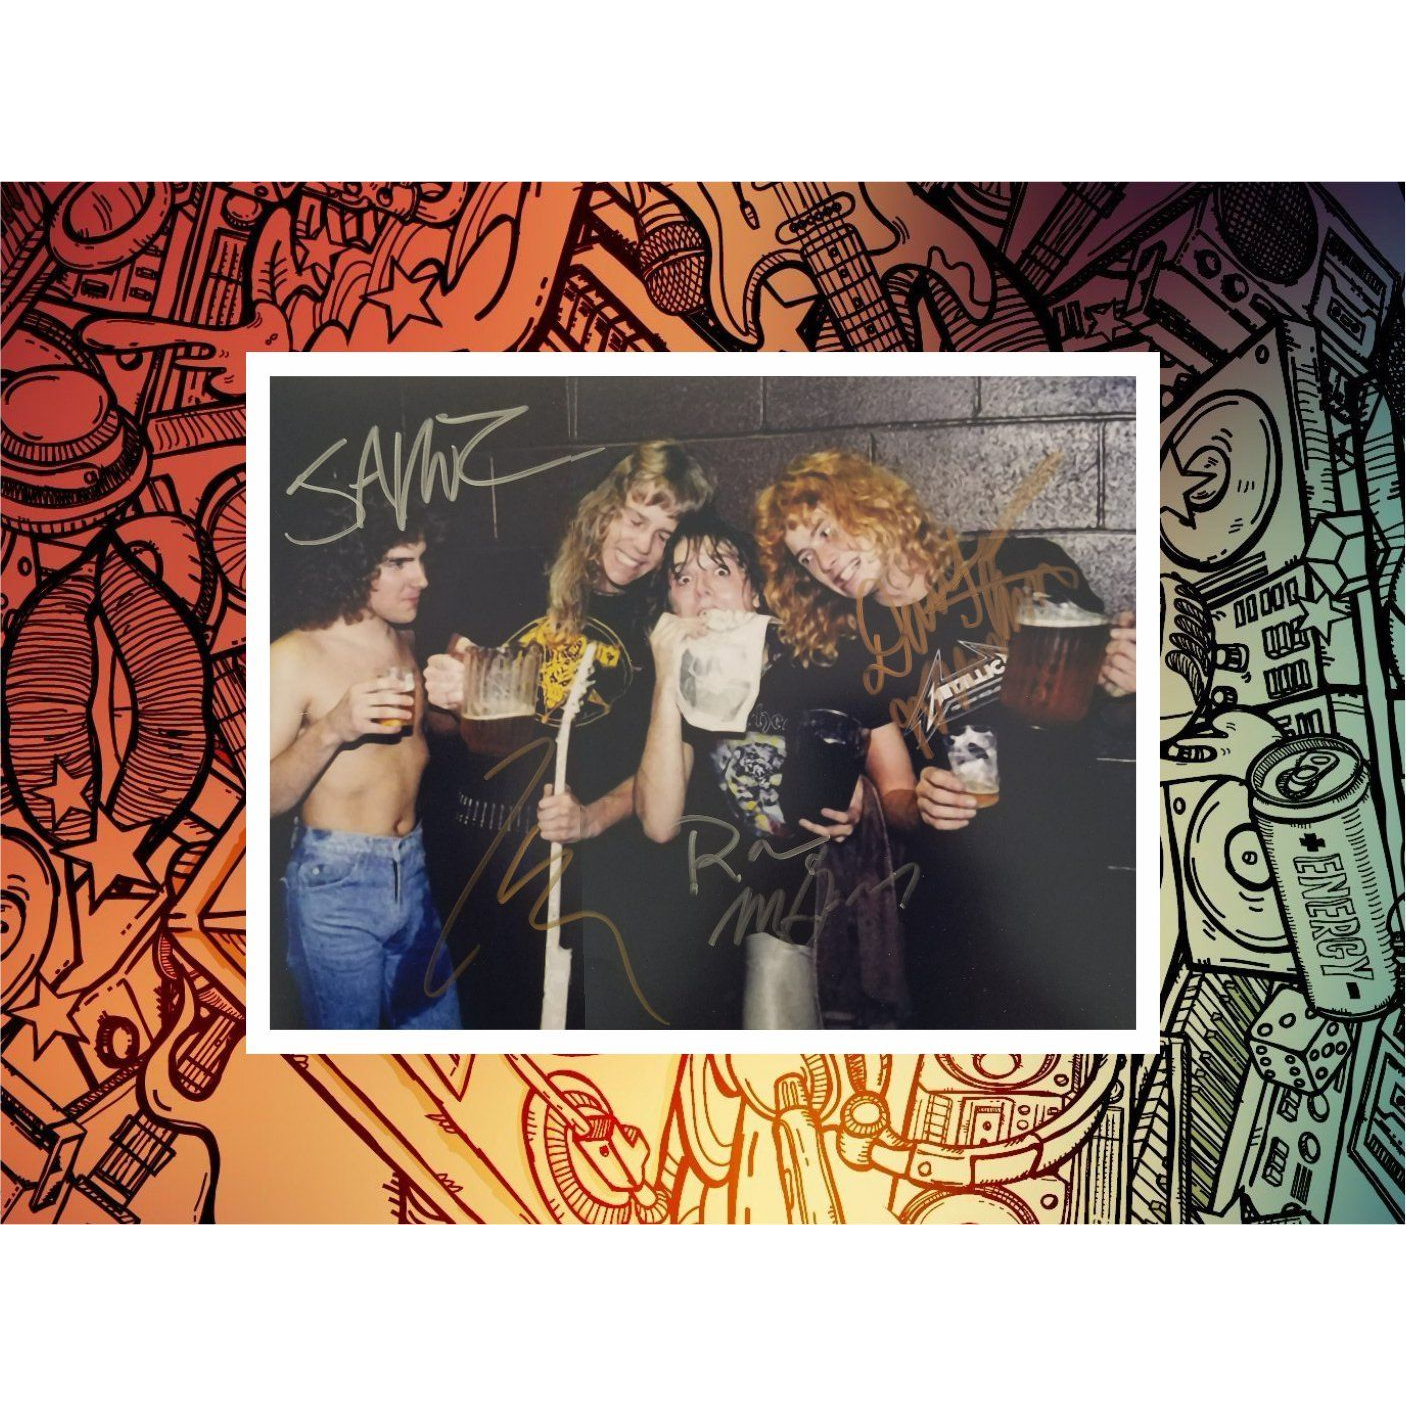 Metallica Dave Mustaine James Hetfield Lars Ulrich Ron McGovney 8x10 photo signed with proof